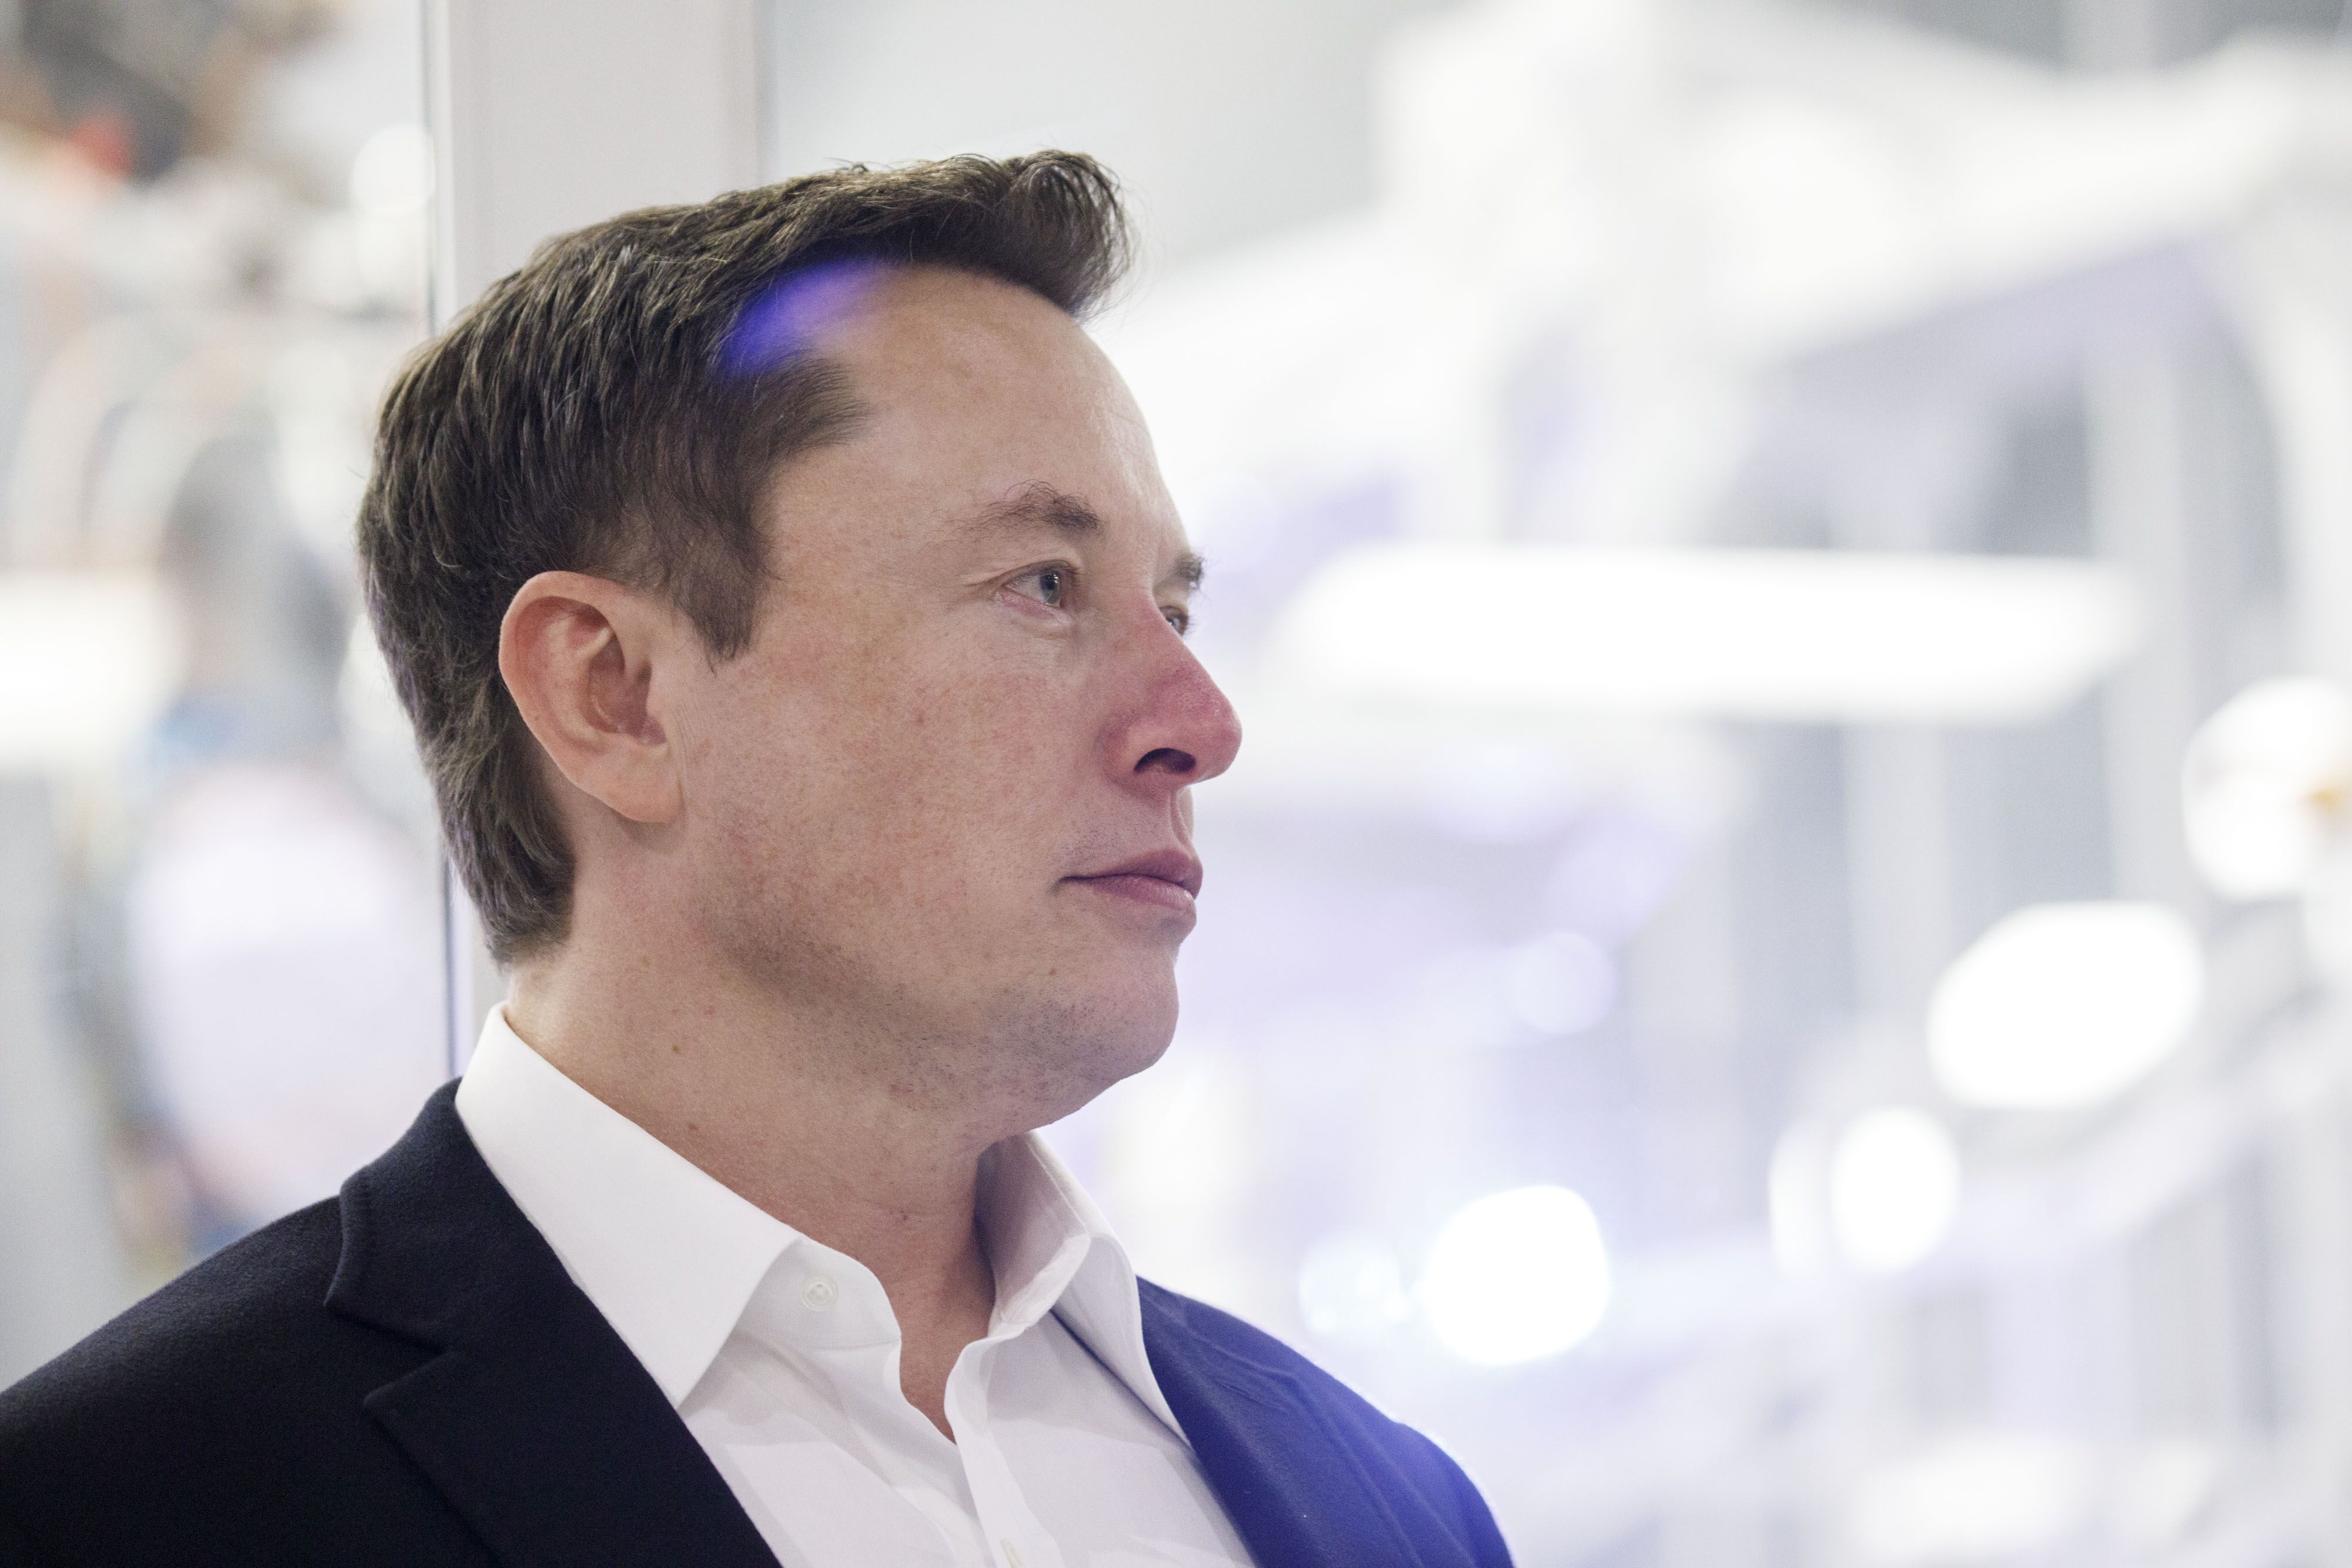 musk’s x sues media matters over pro-nazi content link